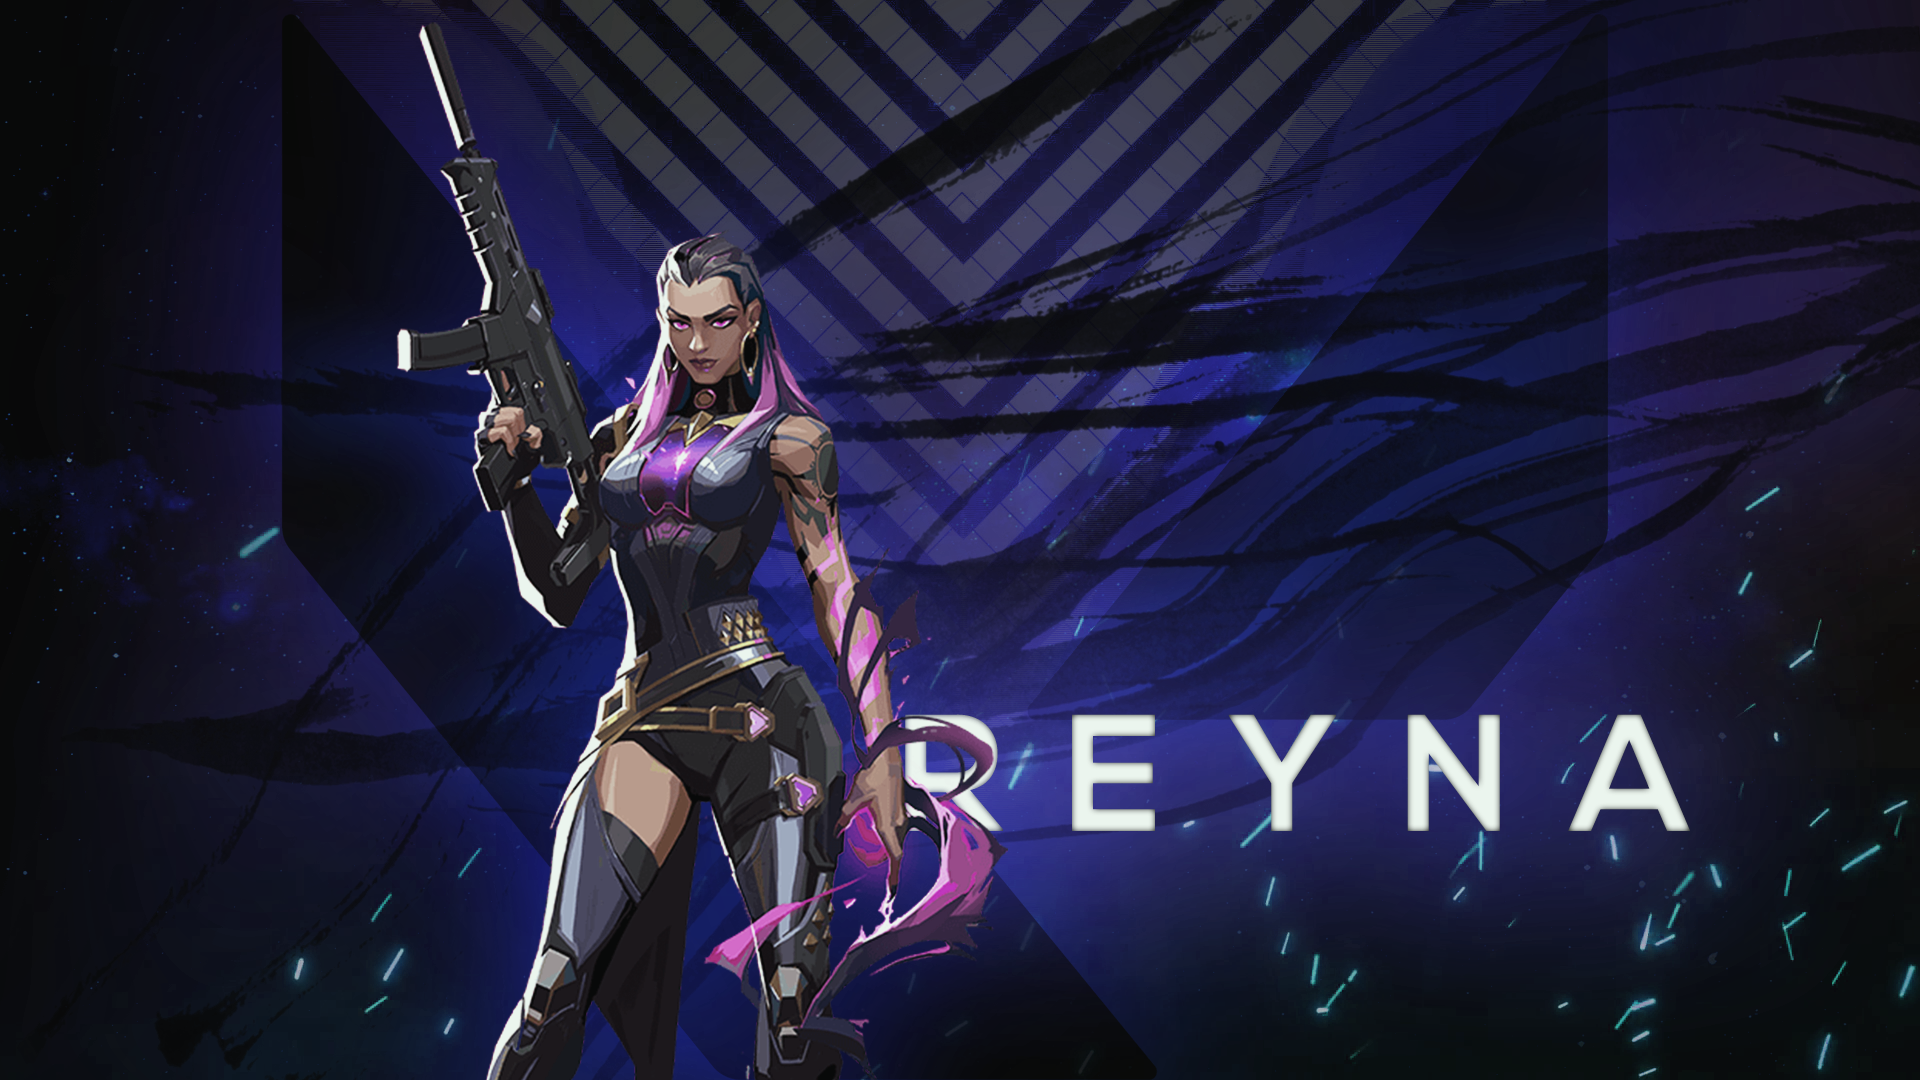 checkout this Reyna wallpaper I made!